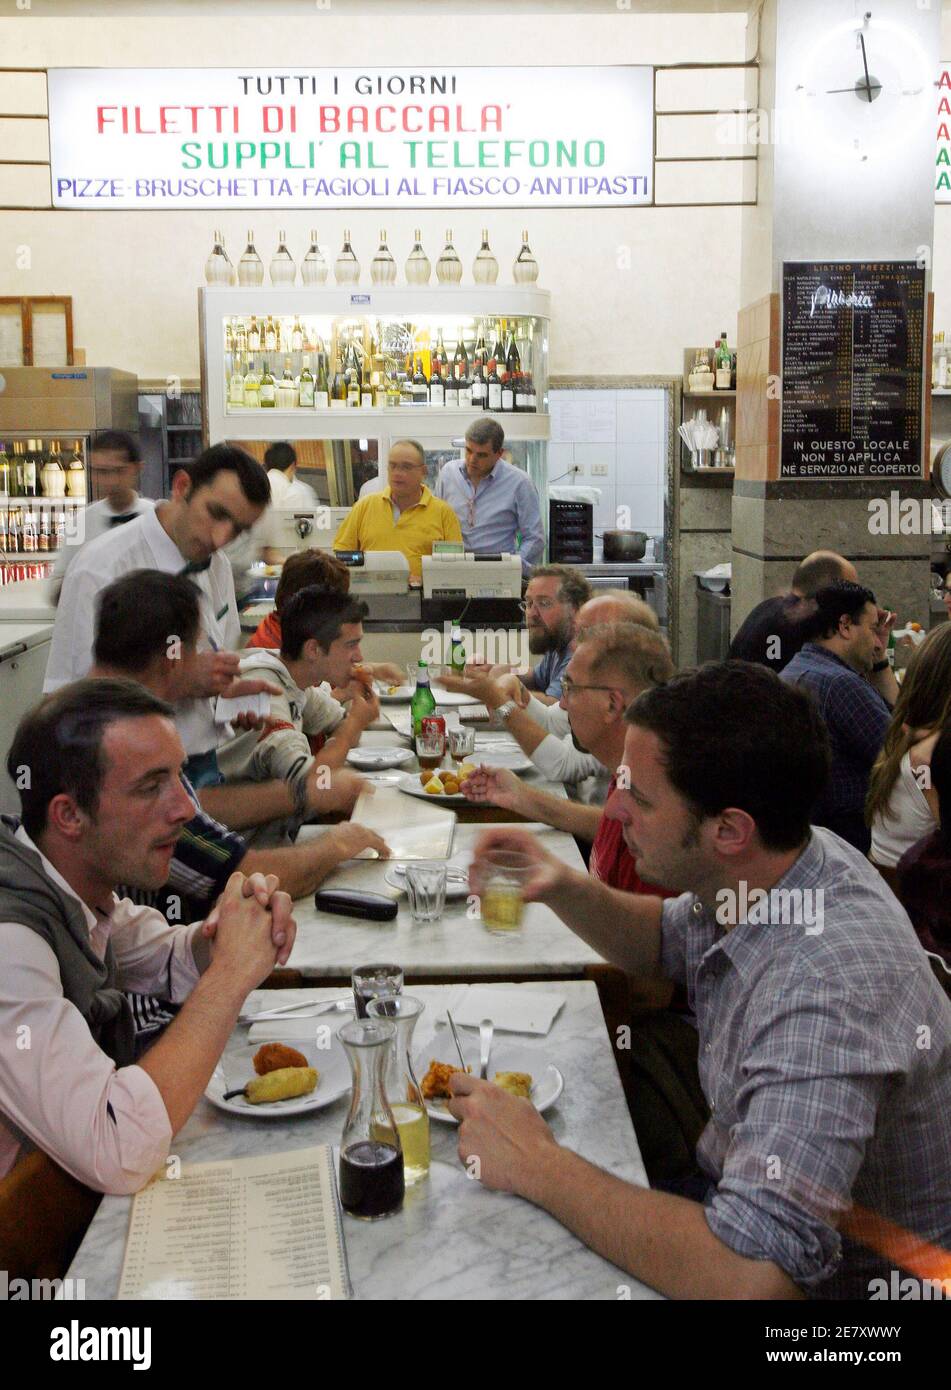 Diners crowd the Ai Marmi pizzeria restaurant in the Rome neighborhood of  Trastevere May 11, 2007. The minimal decor and lively atmosphere make  eating here a journey to a bygone time when